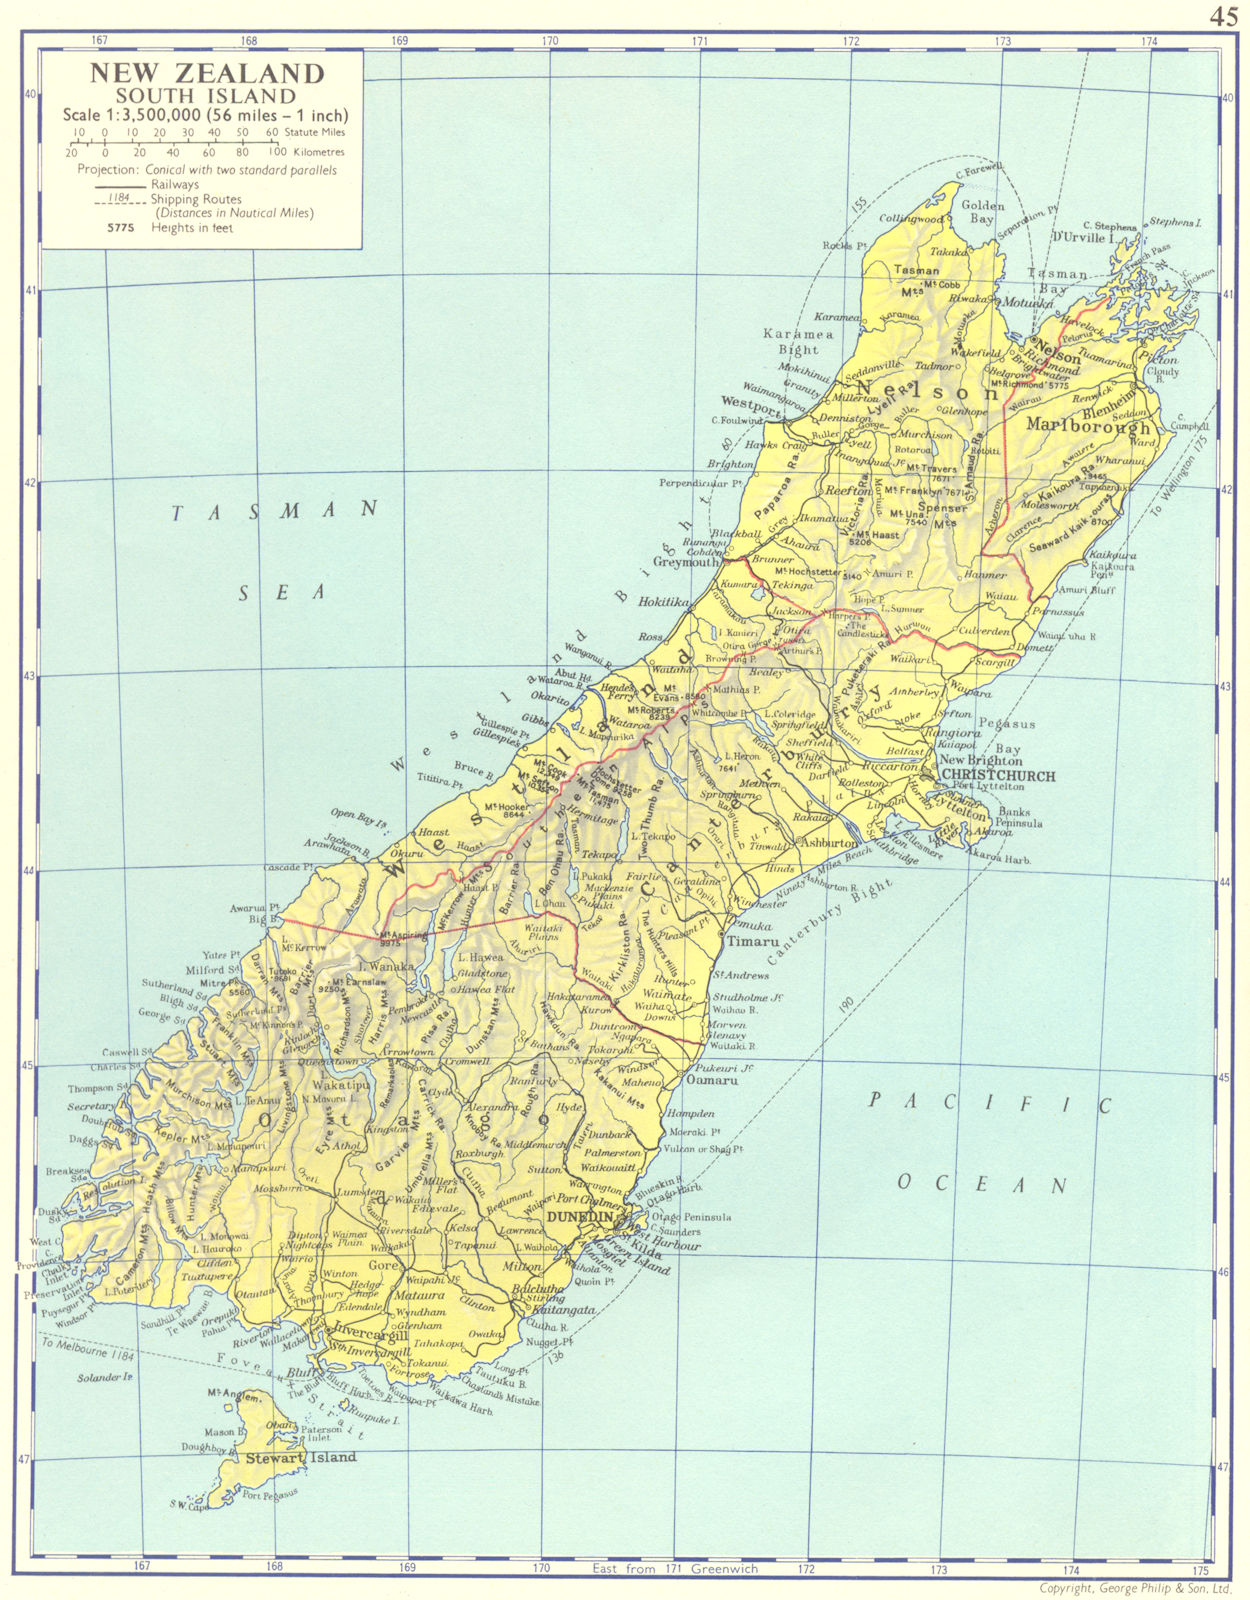 NEW ZEALAND. New Zealand; South Island 1962 old vintage map plan chart